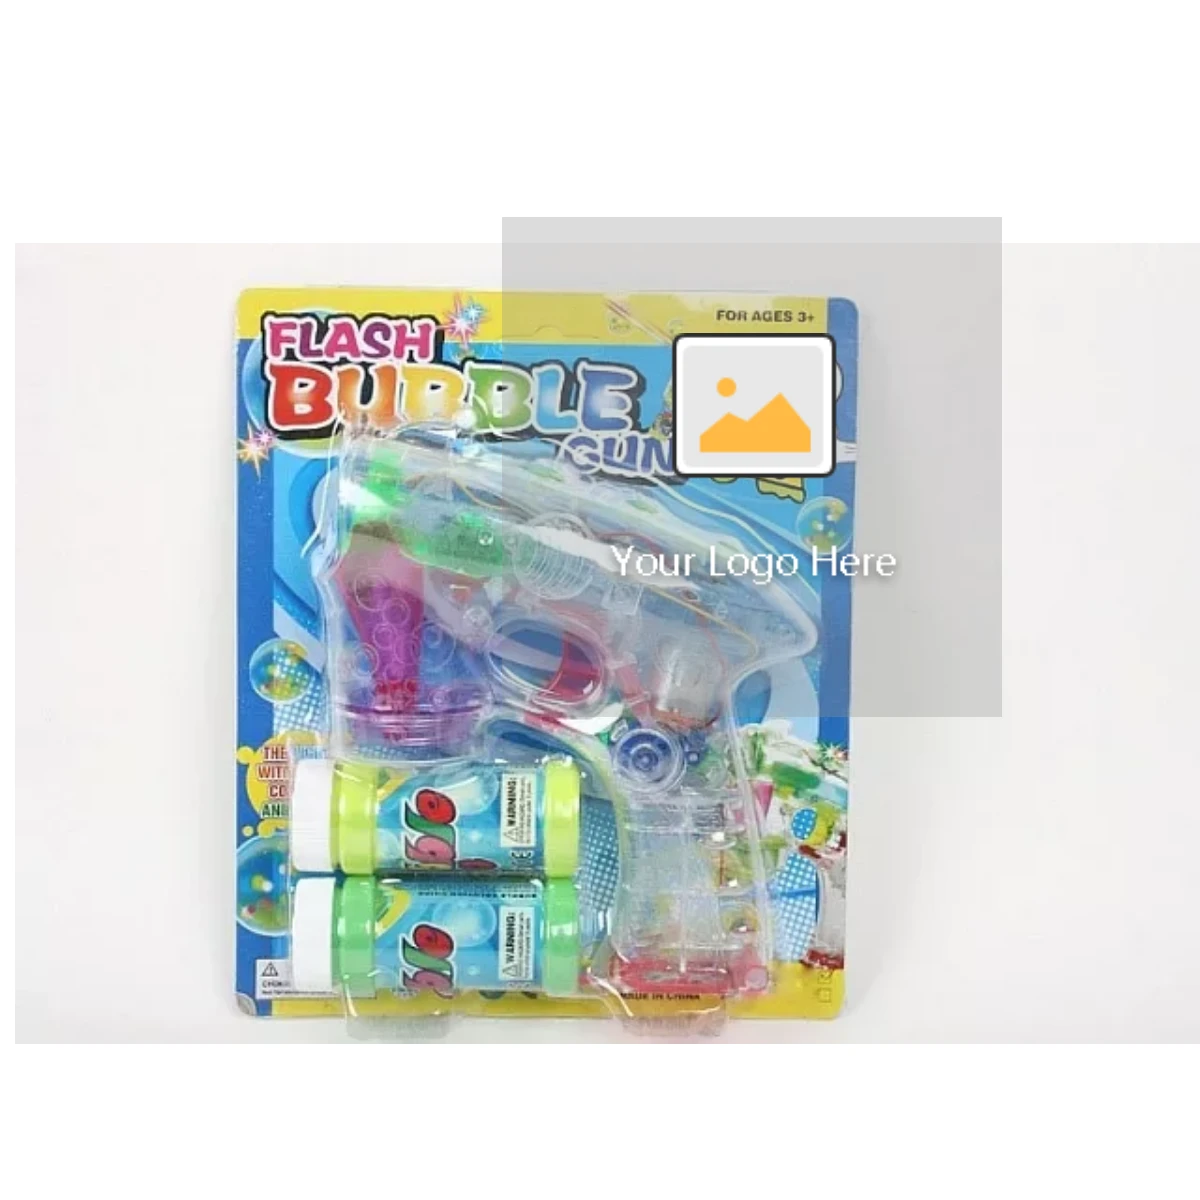 Hot sale bubble gun toy with led flashing lights for kids